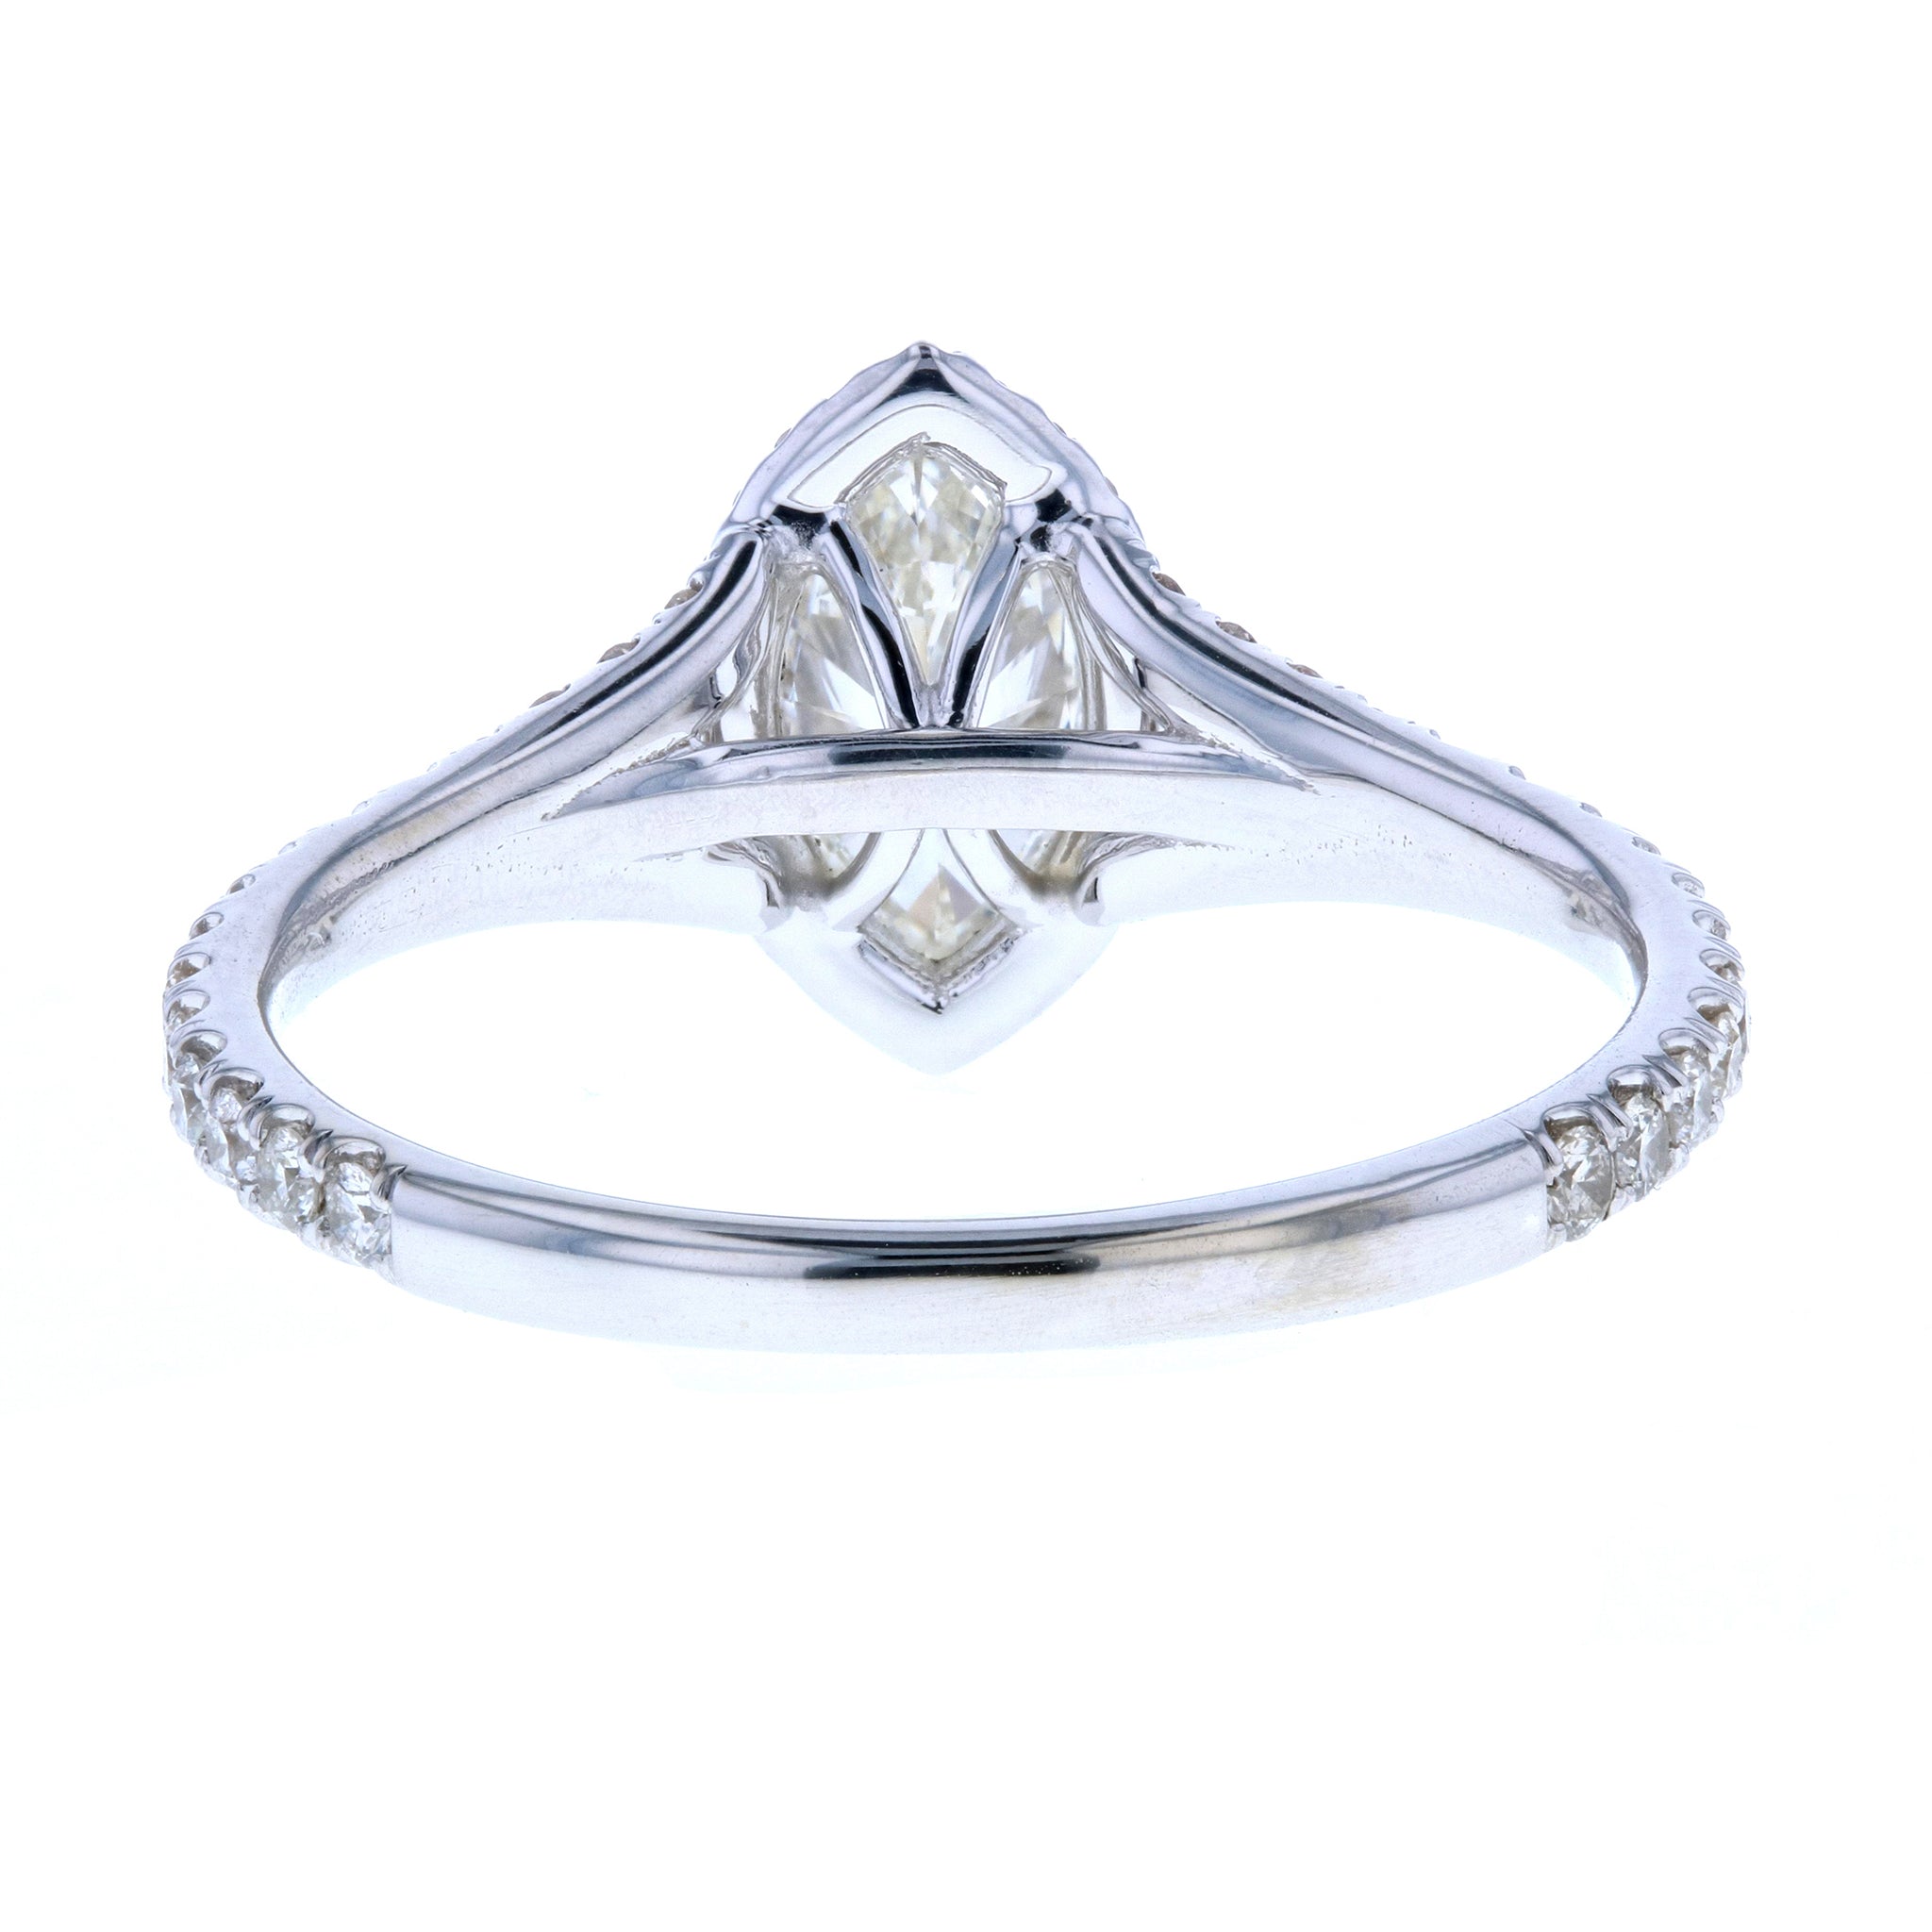 Marquise Diamond Engagement Ring with Diamond Halo and Pave